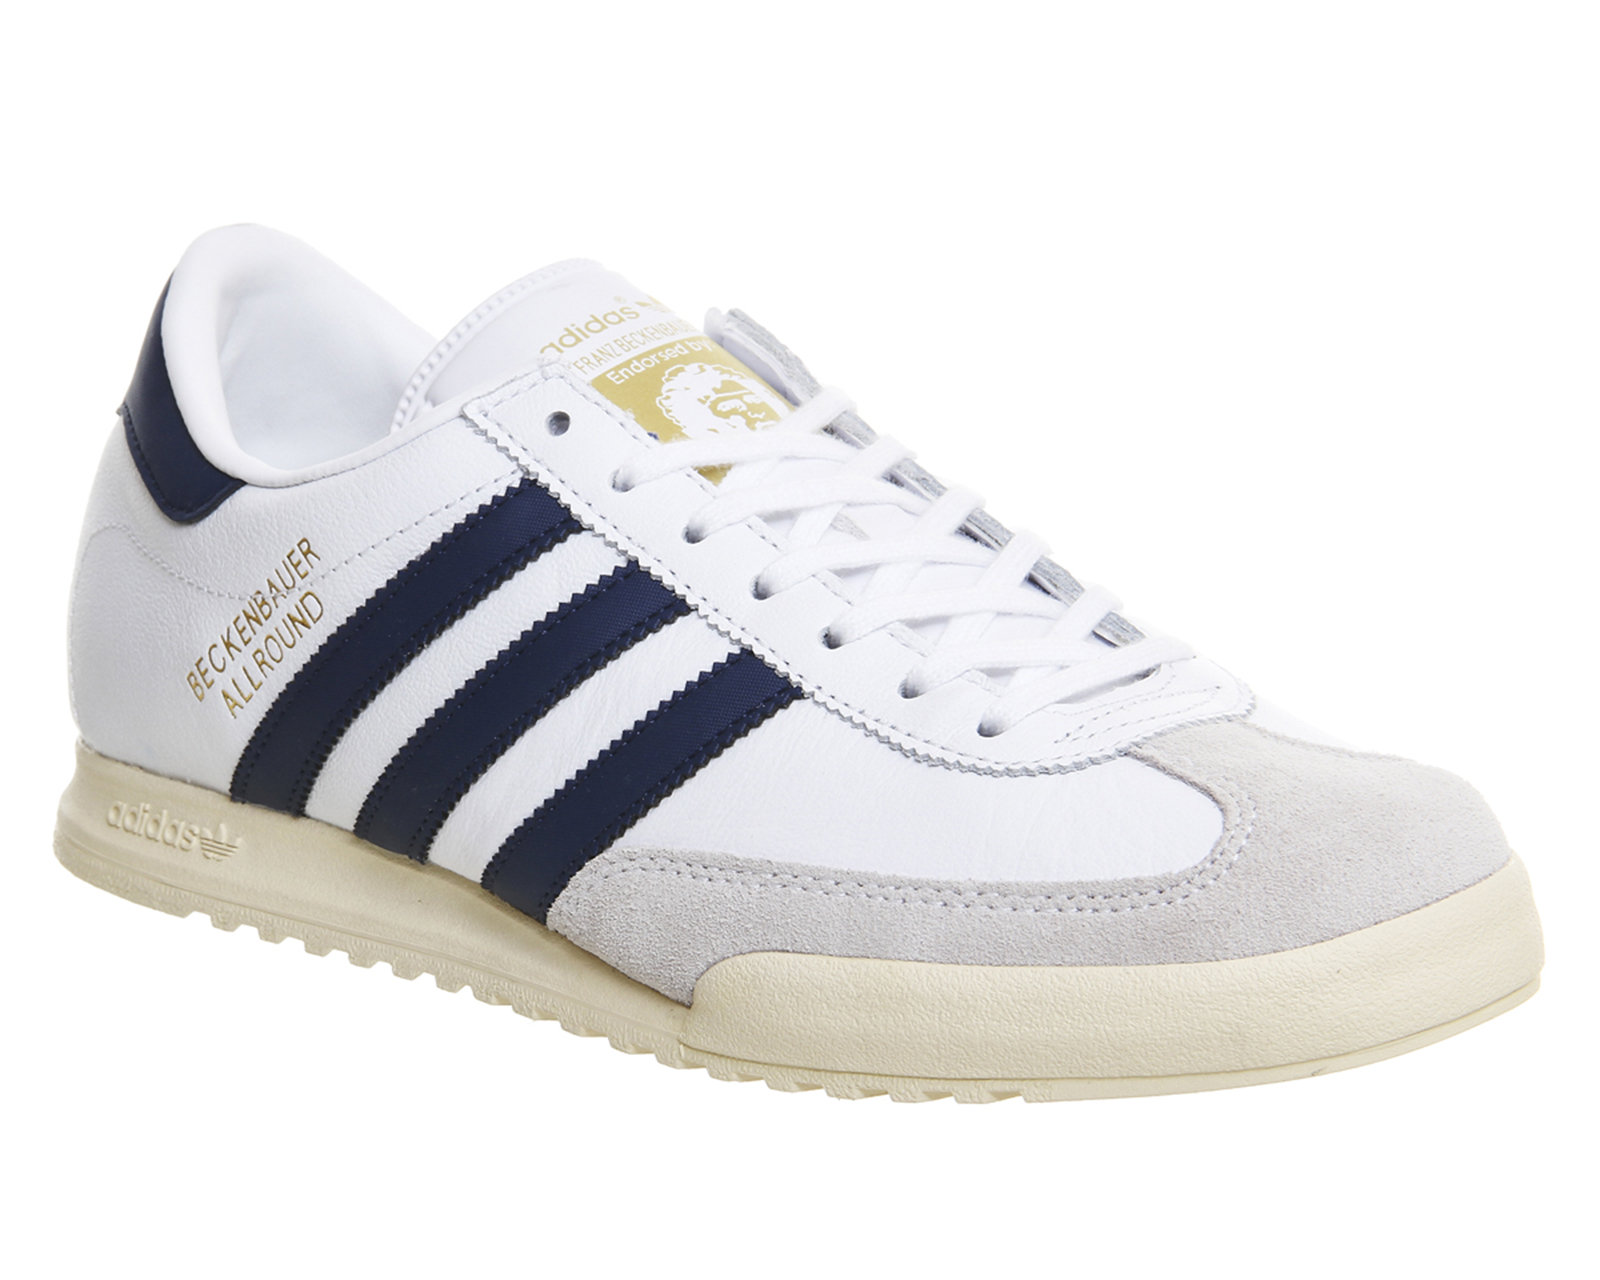 adidas Beckenbauer Trainers White Navy - His trainers